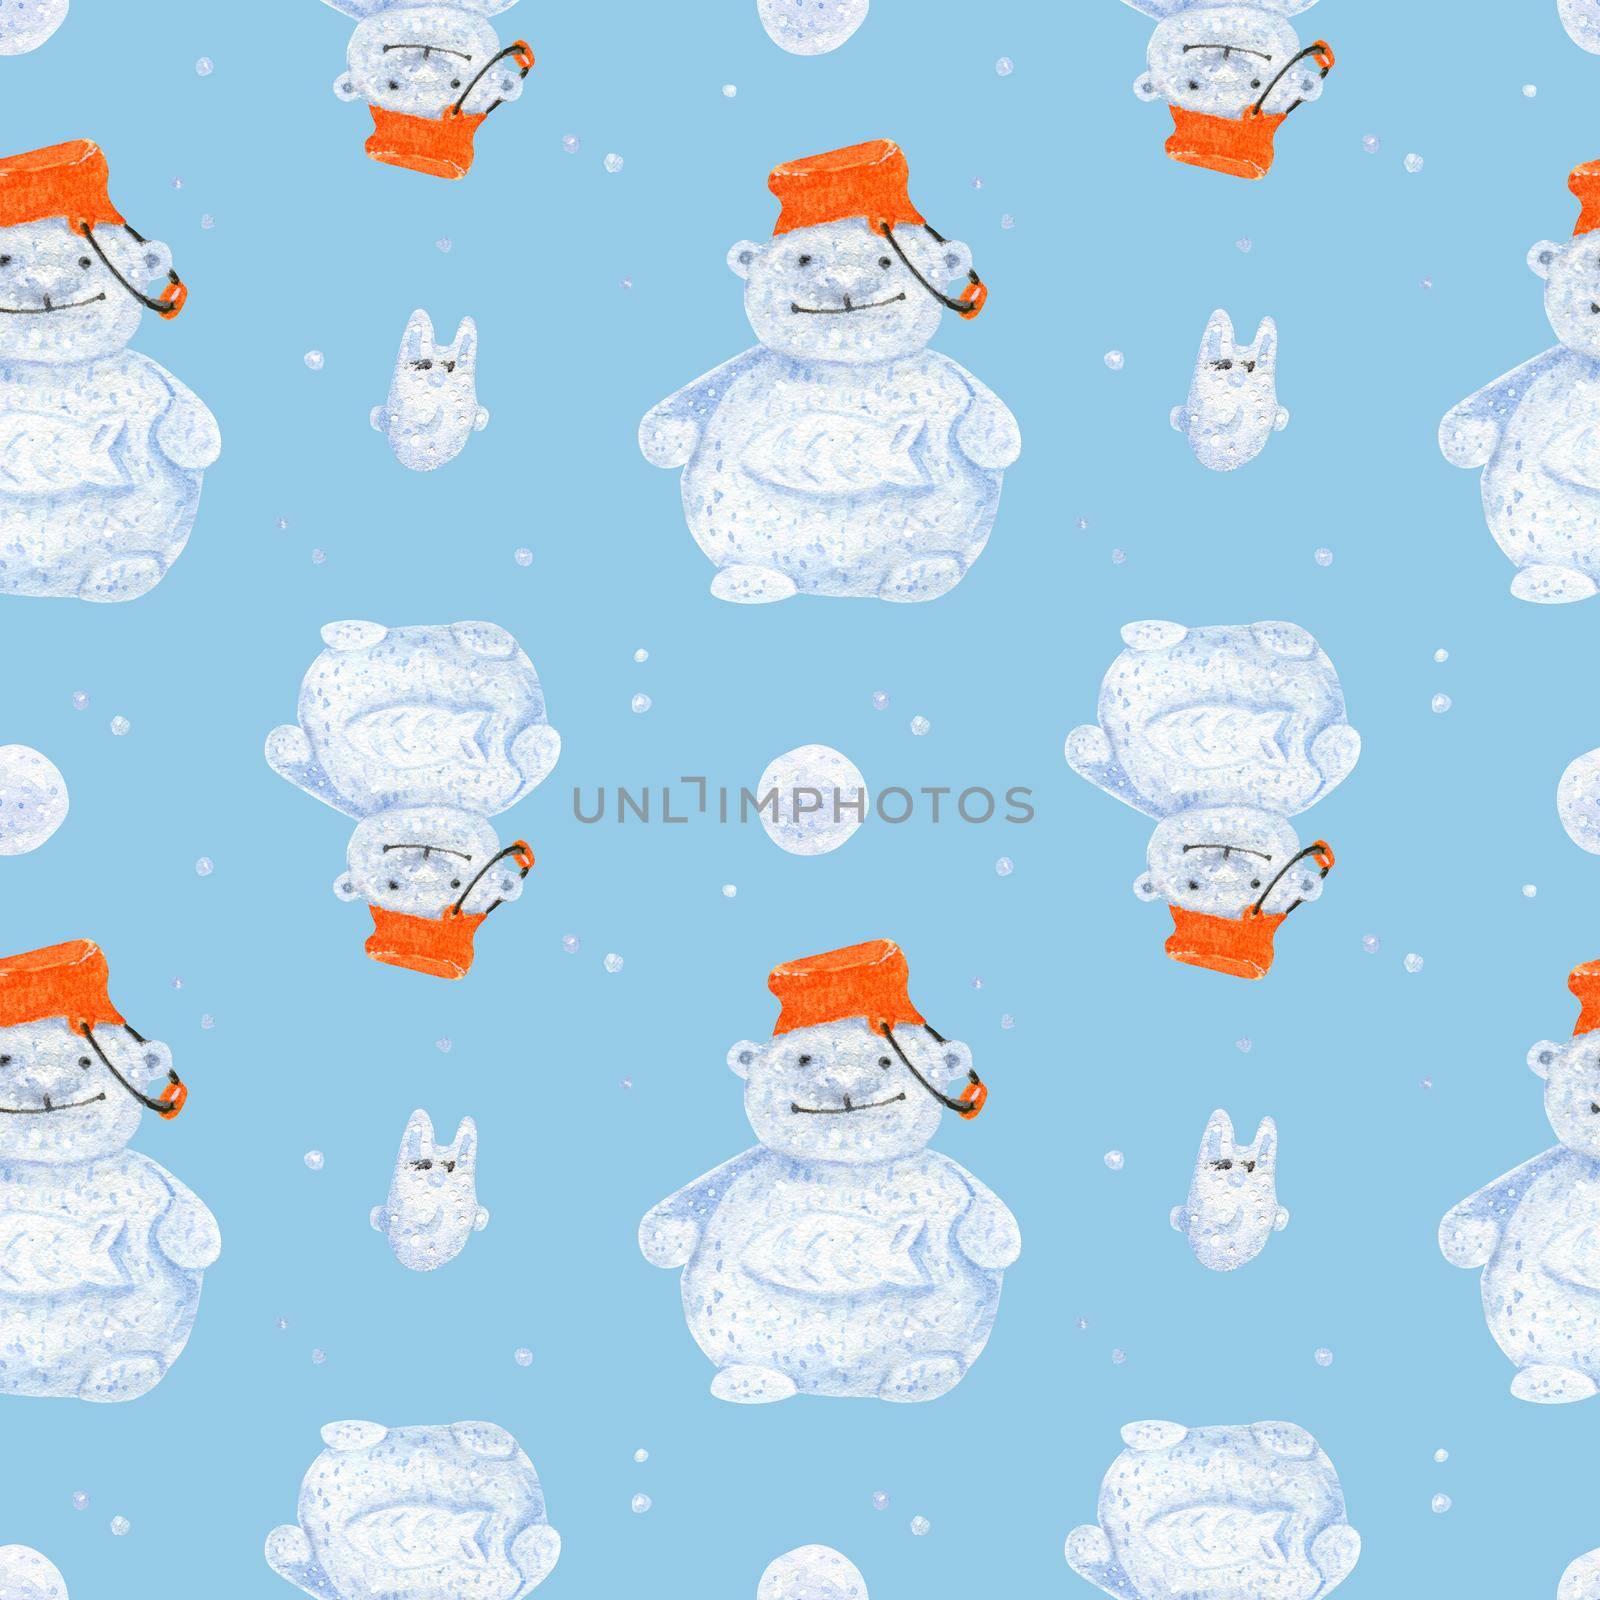 Polar bear snowman. Watercolor seamless patterns for textile, wrapping paper and any tiled design. Blue background, clipping path uncluded